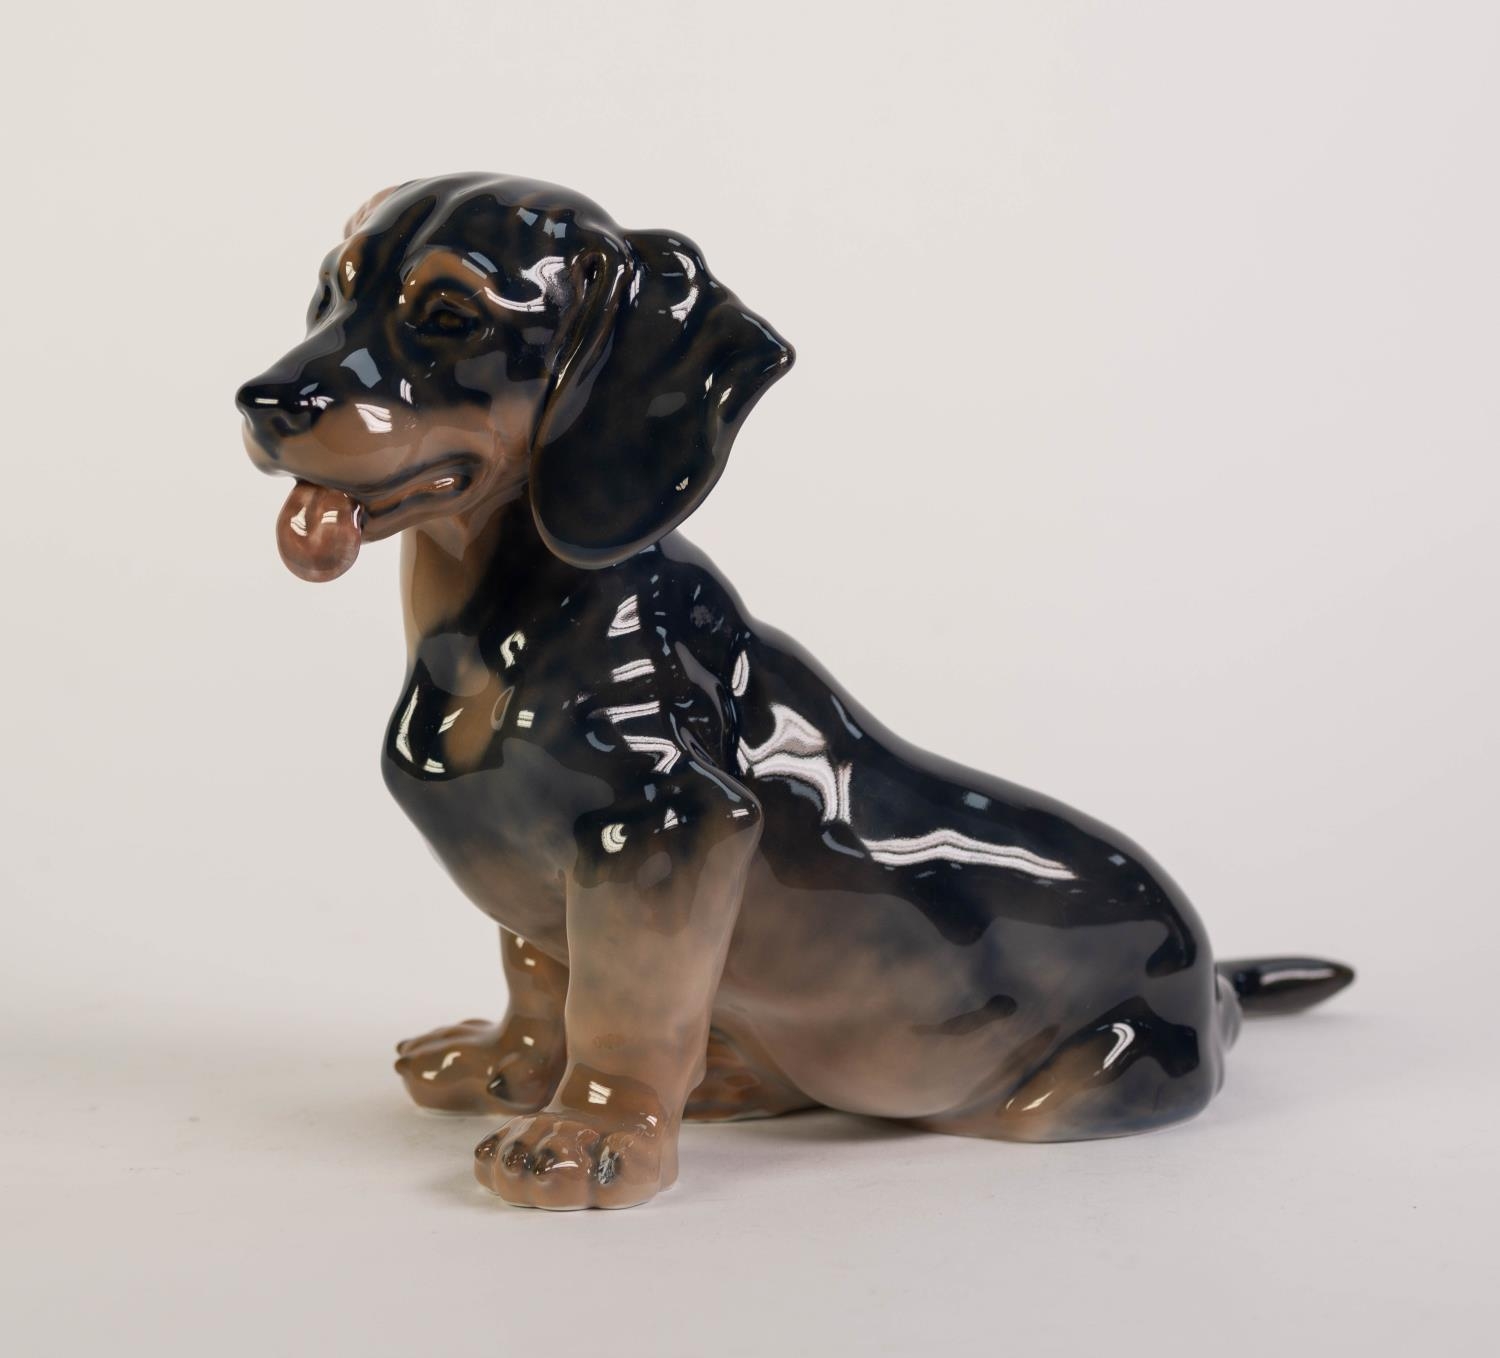 ROYAL COPENHAGEN PORCELAIN MODEL OF A DACHSHUND PUPPY, painted in natural tones and modelled